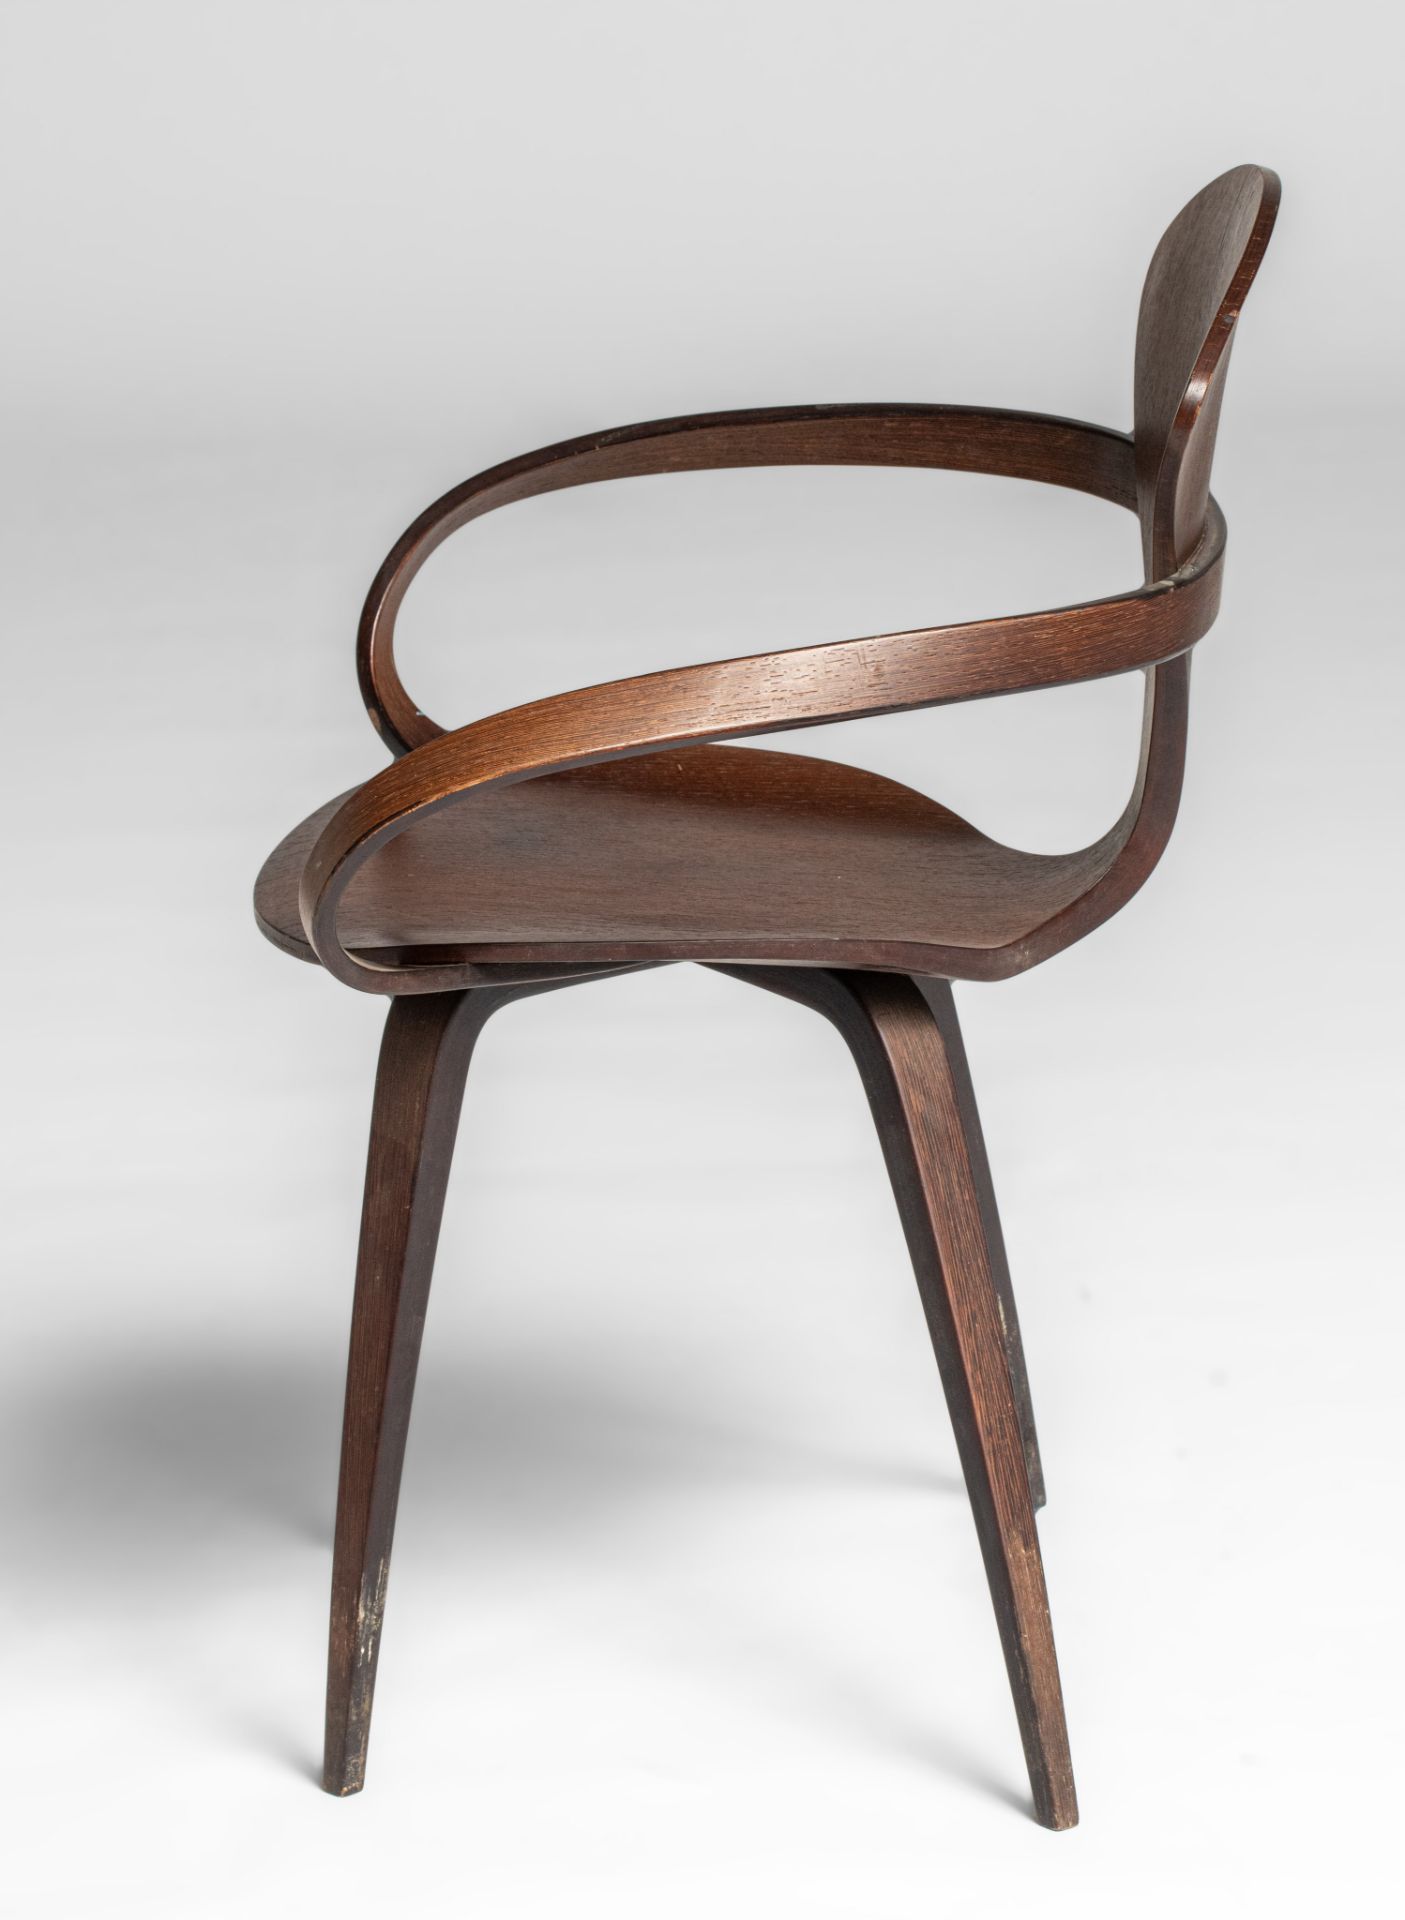 A vintage rosewood Pretzel chair by George Nelson, H 79,5 - W 67 cm - Image 5 of 13